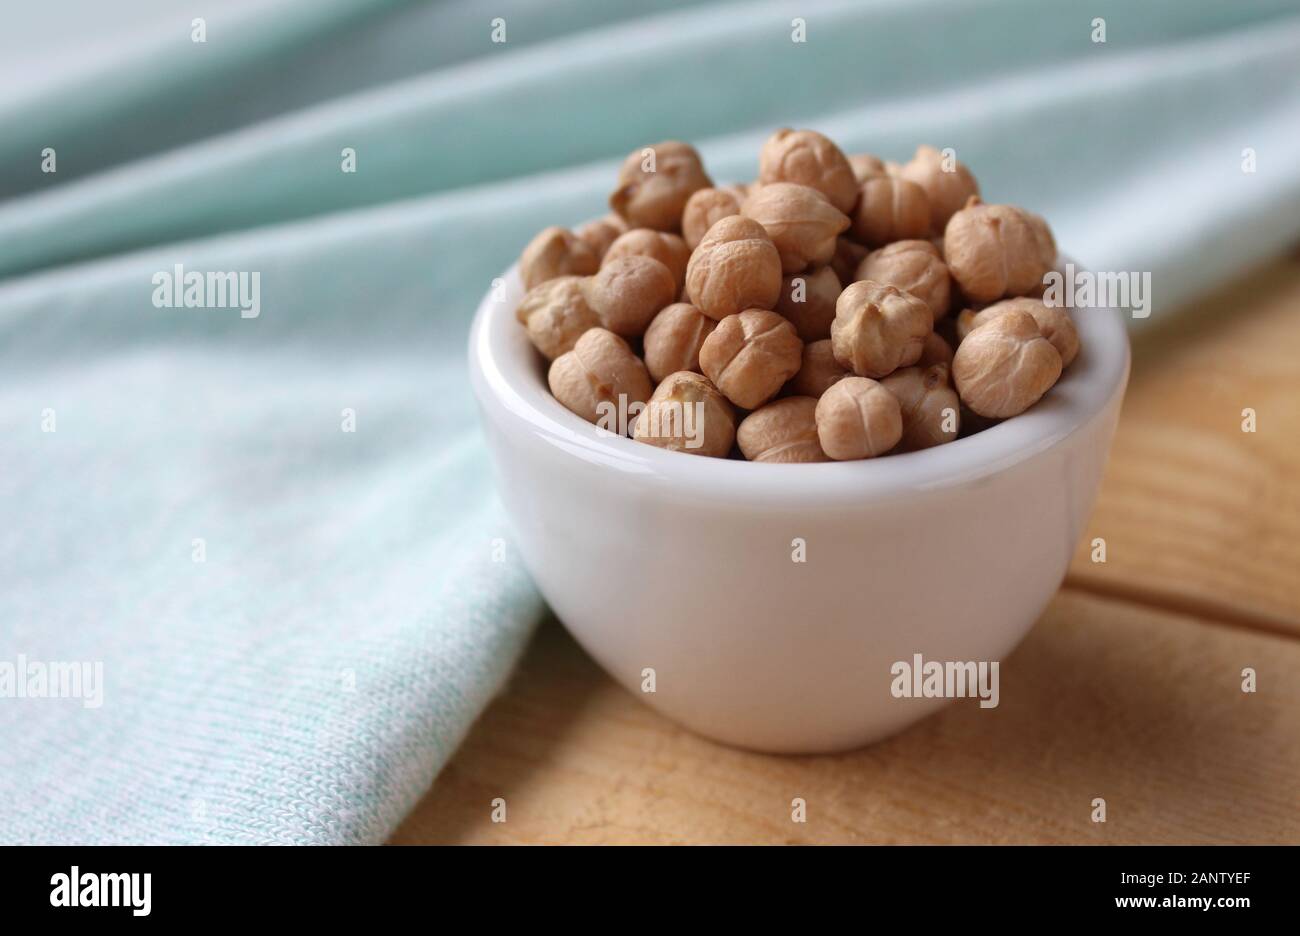 Side on view of a white bowl filled with chick peas (Cicer arietinum), on a wooden table with mint green table cloth. With copyspace. Stock Photo